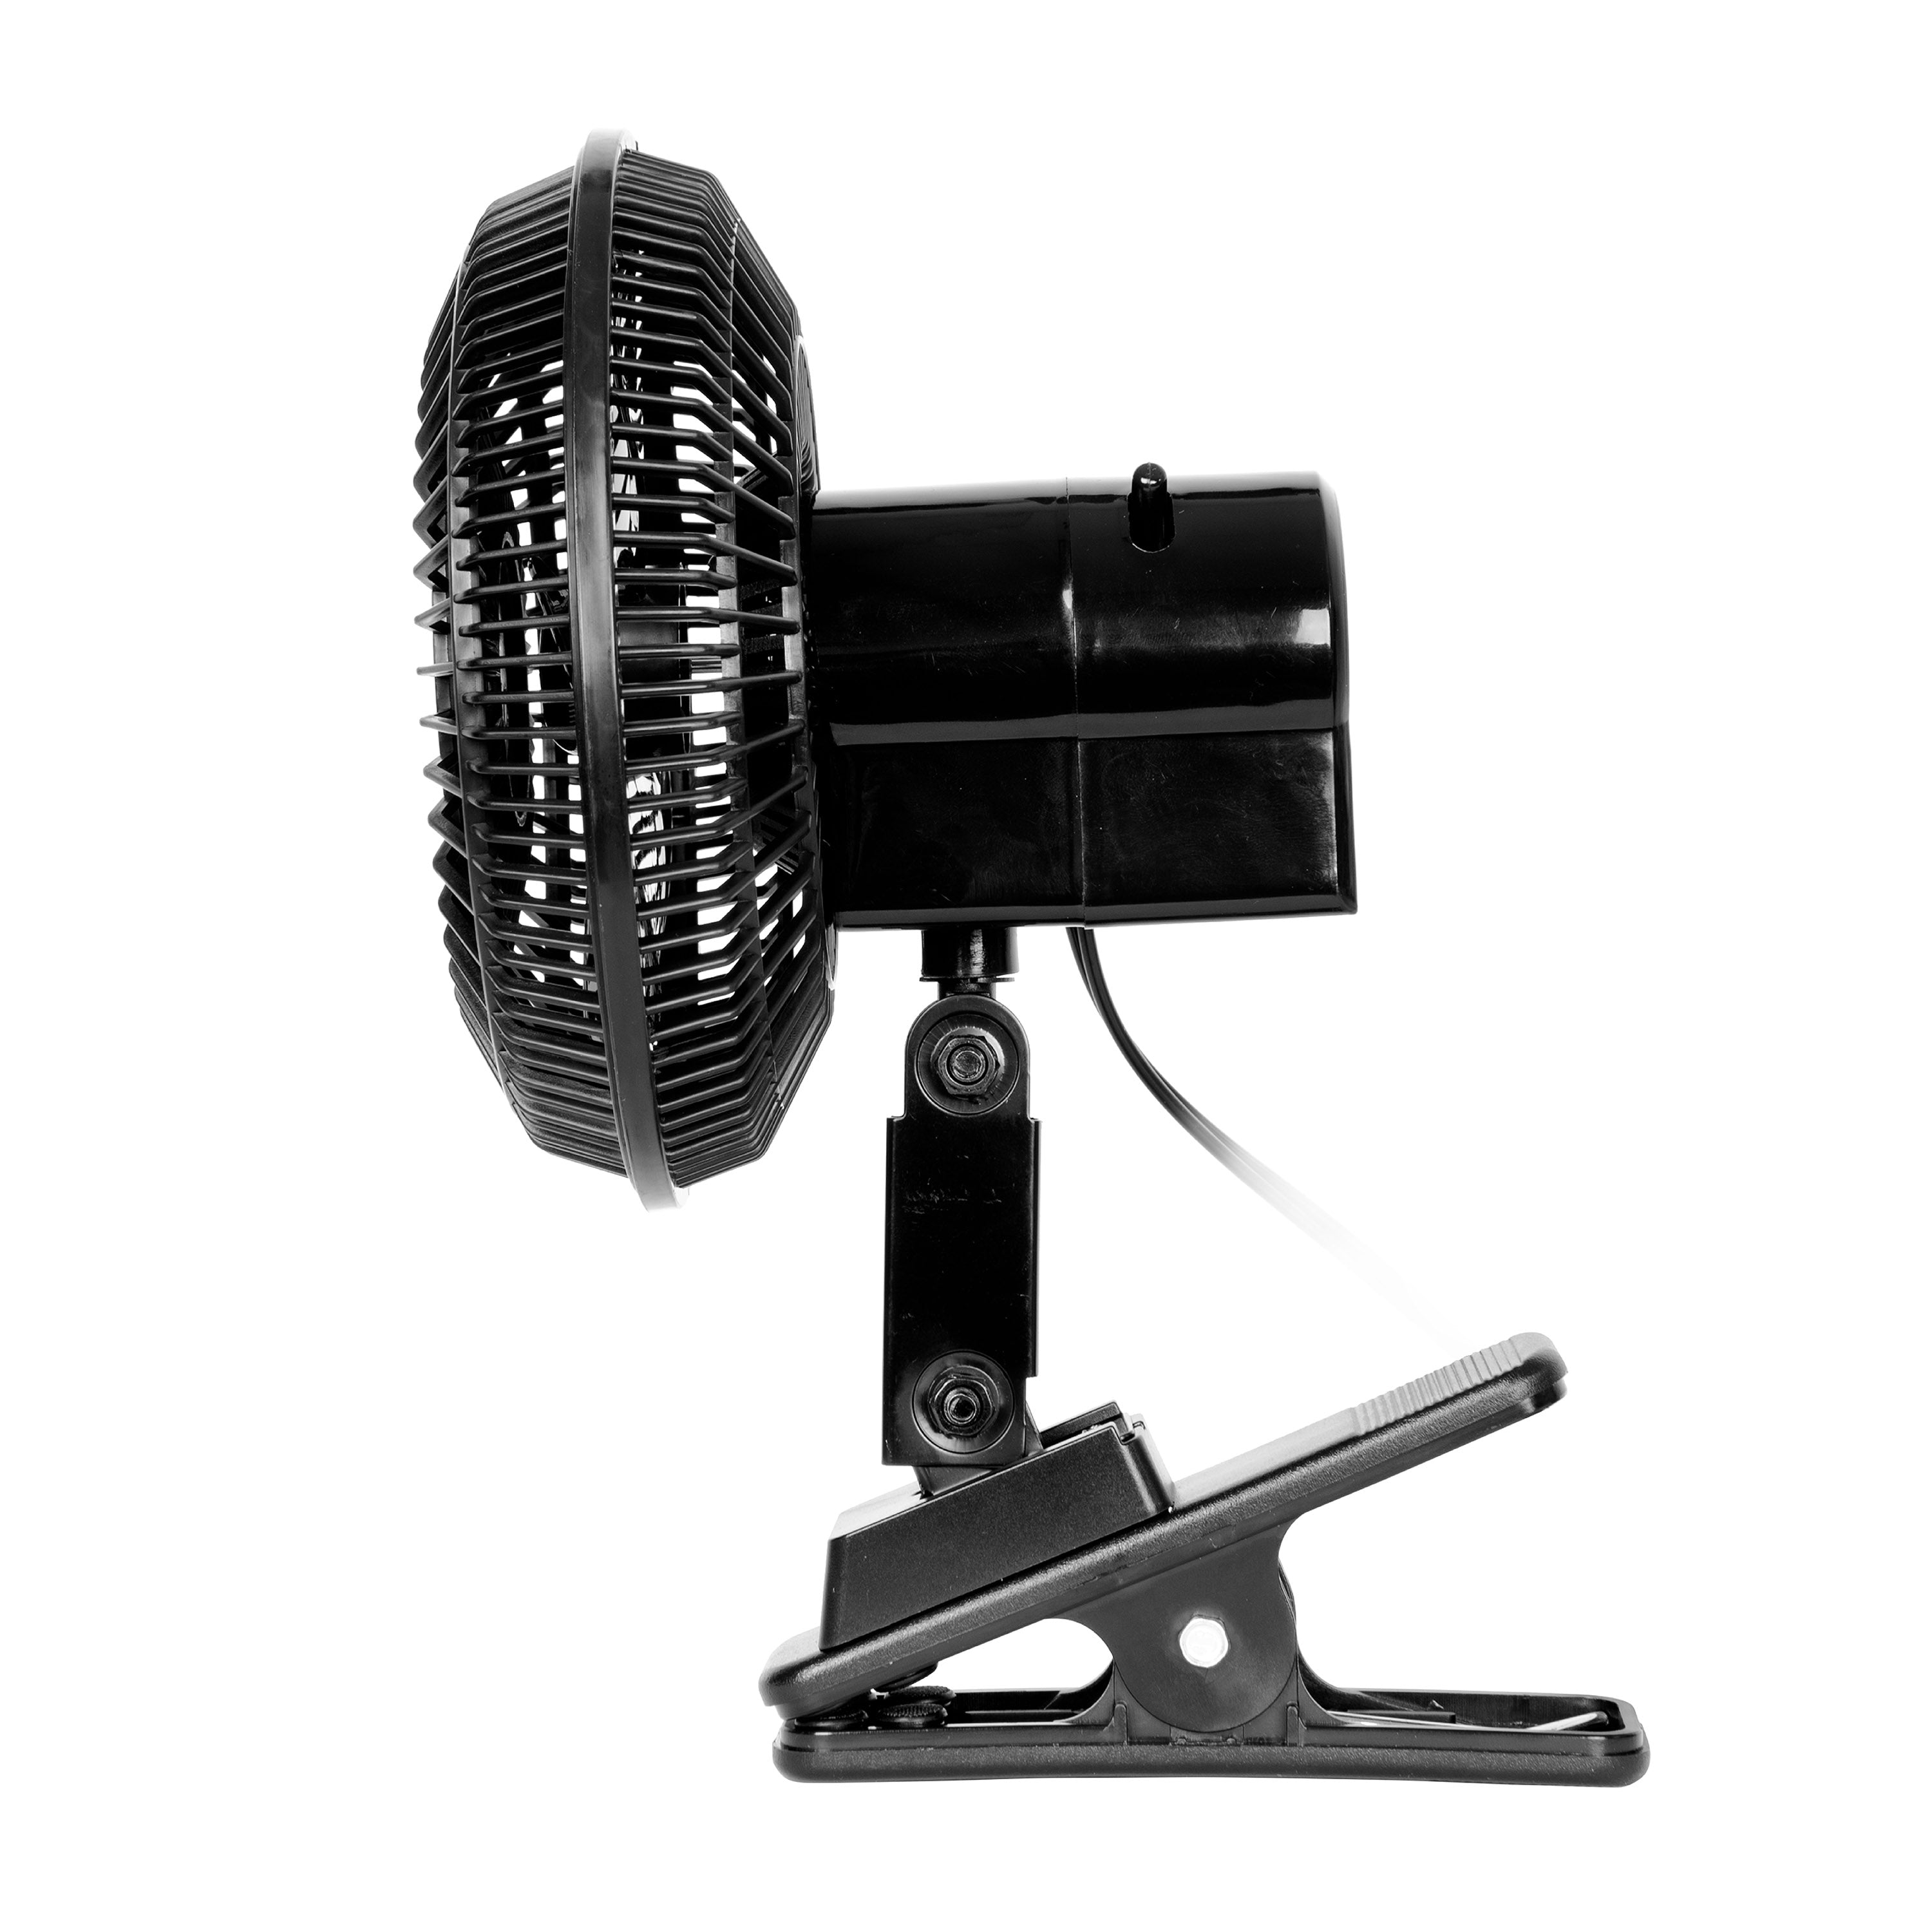 CAT 12-Volt Portable Clip-On Fan with Oscillating Design